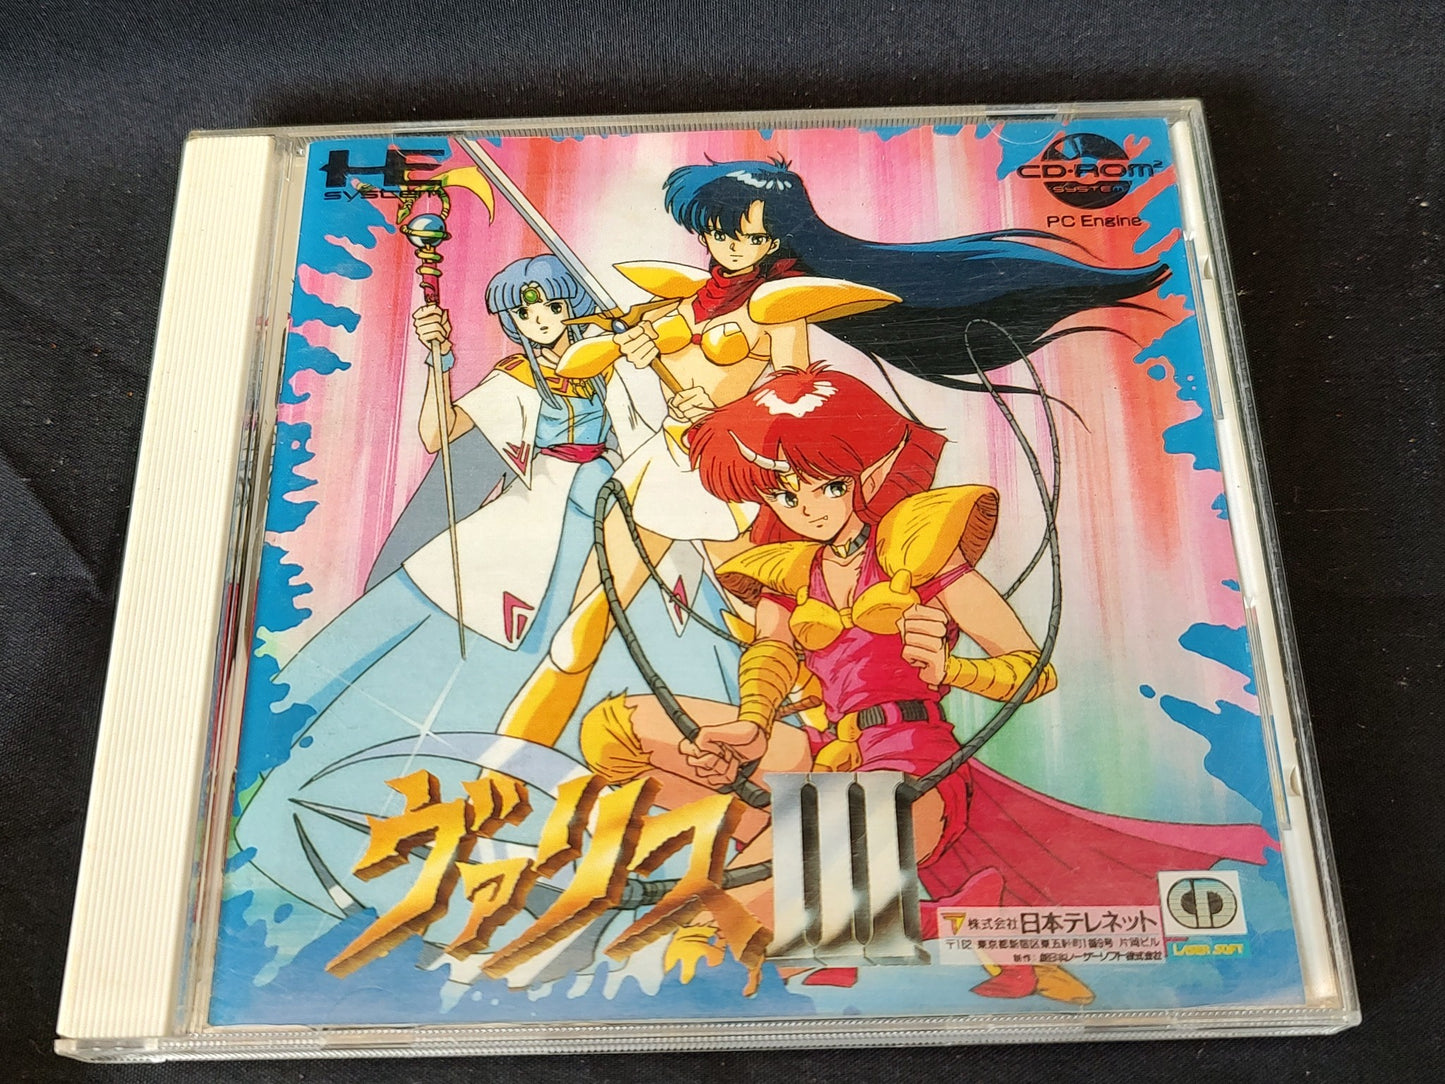 Valis 2 and 3 The Fantasm Soldier set PC Engine CD-ROM2 ,w/Manual,Cased-g0412-